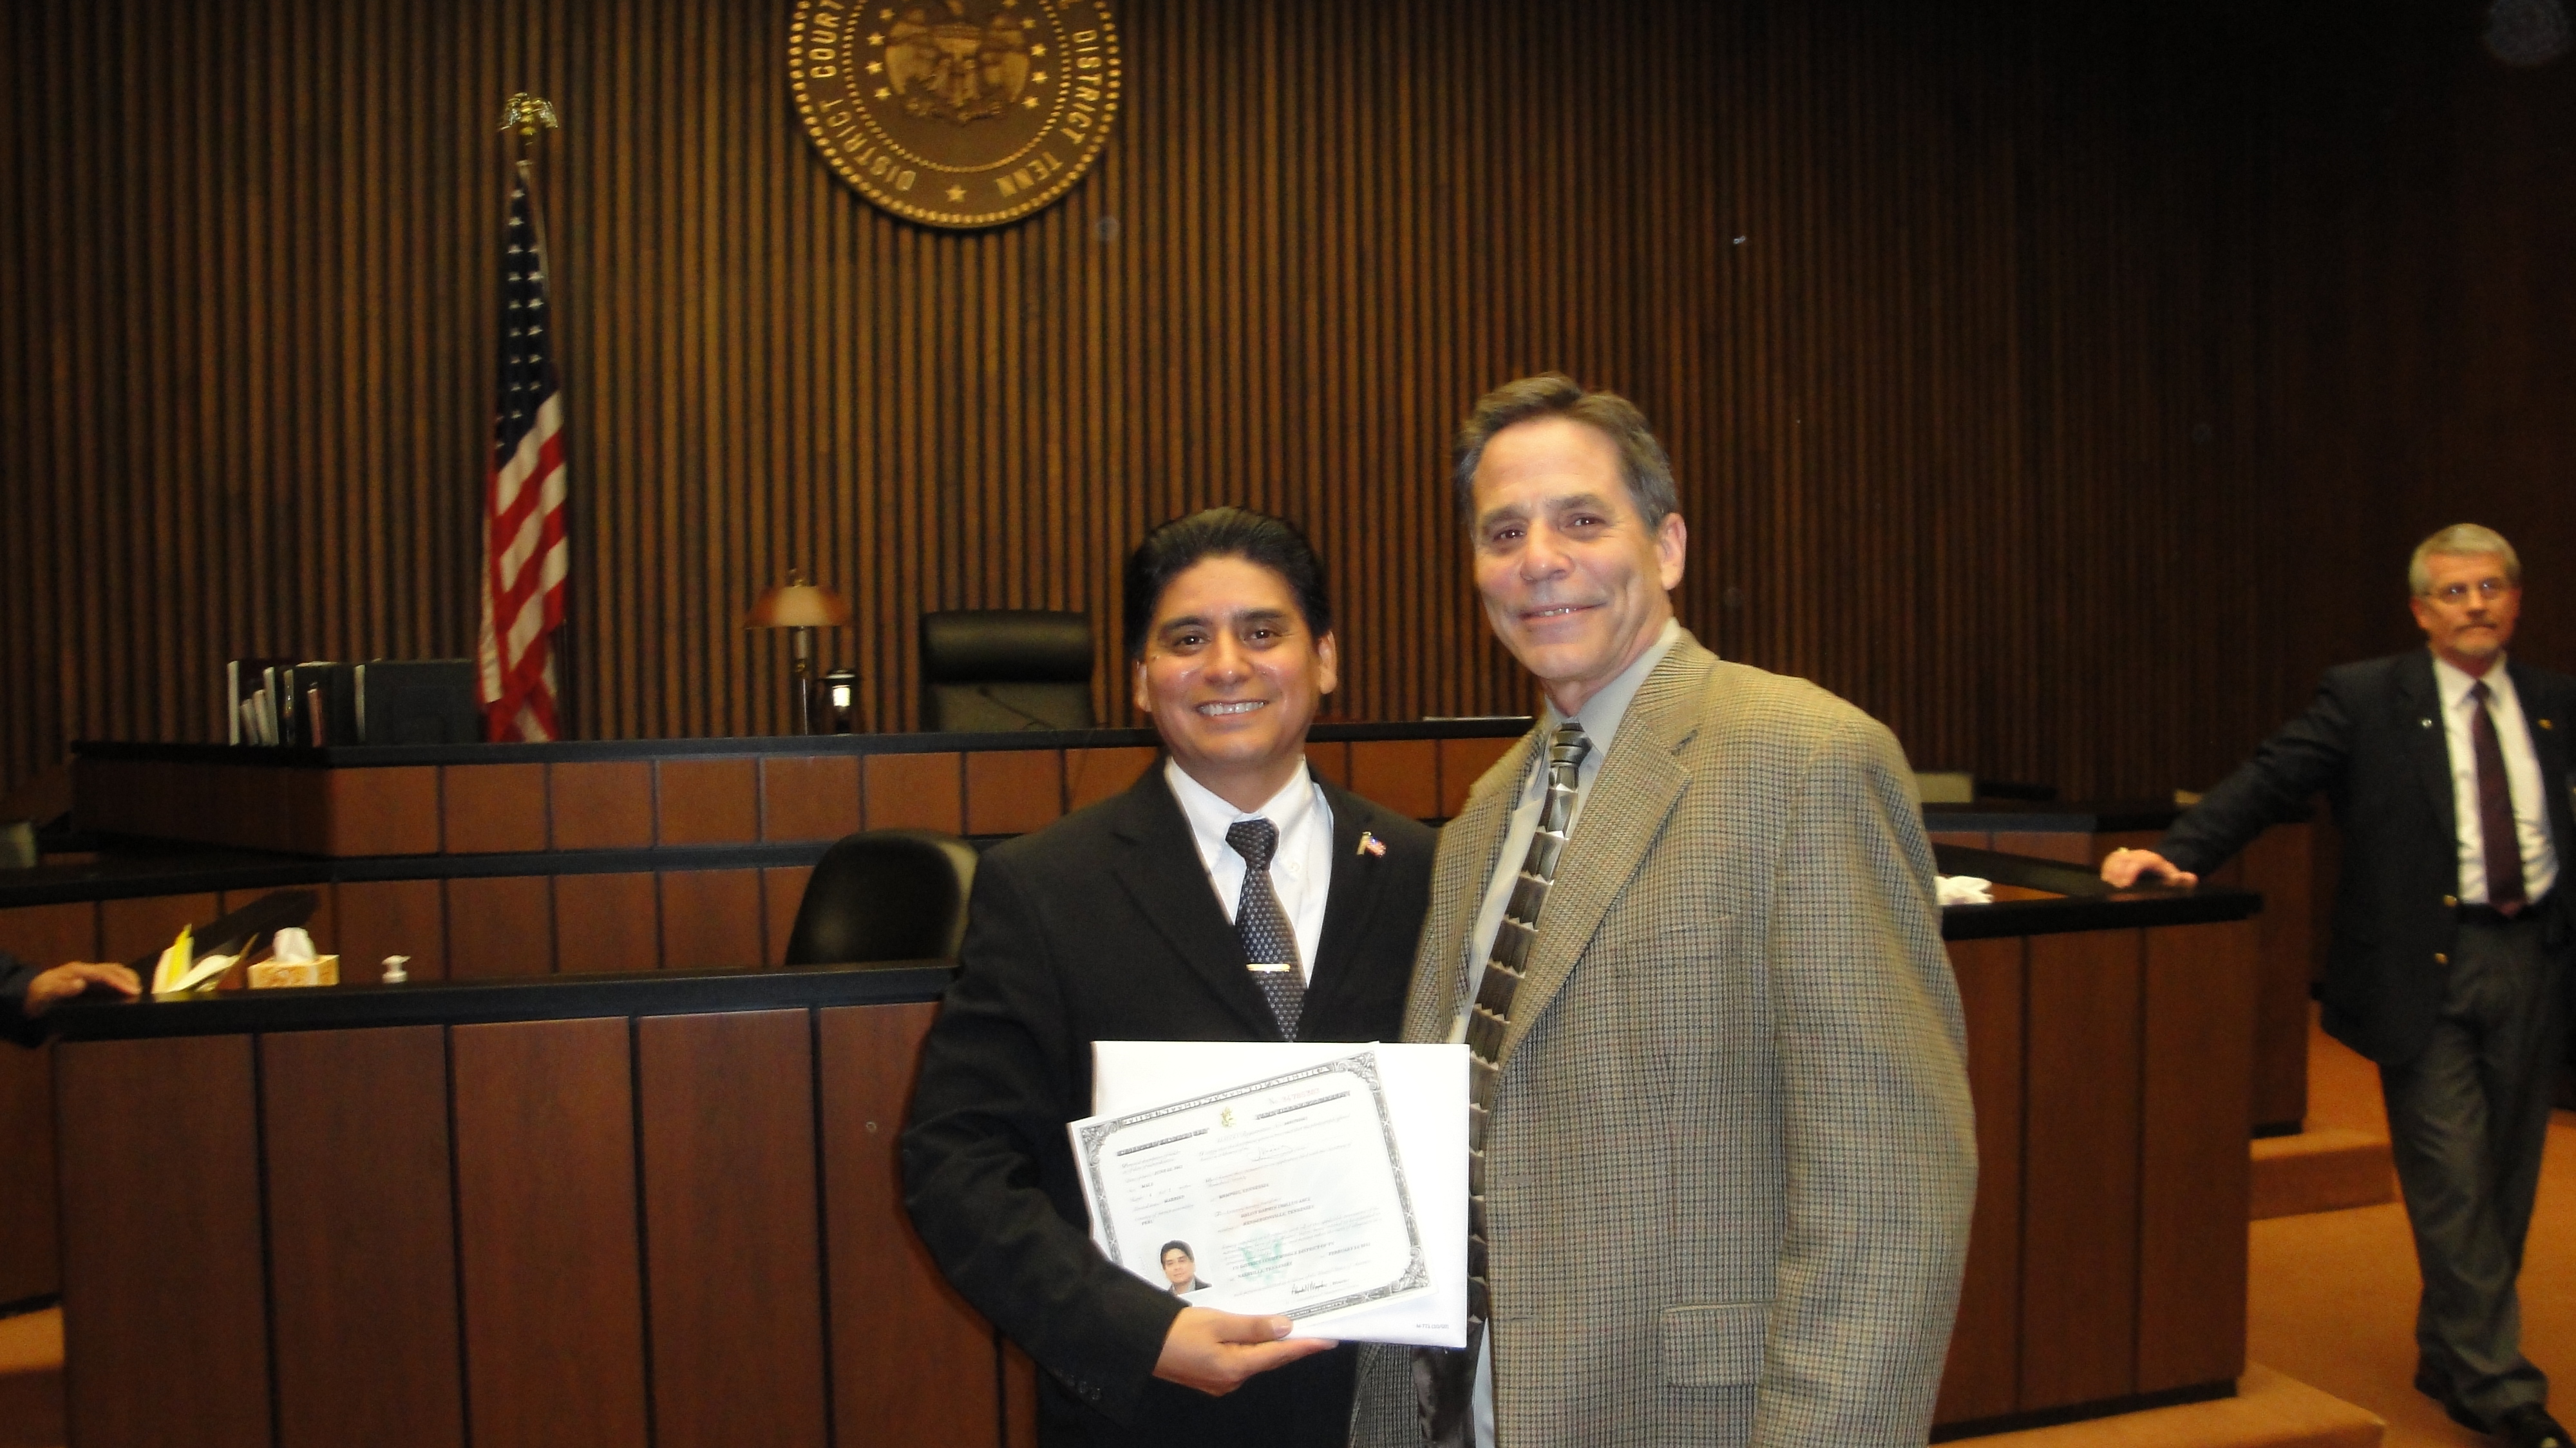 An Amazing Week – U.S. Citizenship Conferred At Federal Courthouse